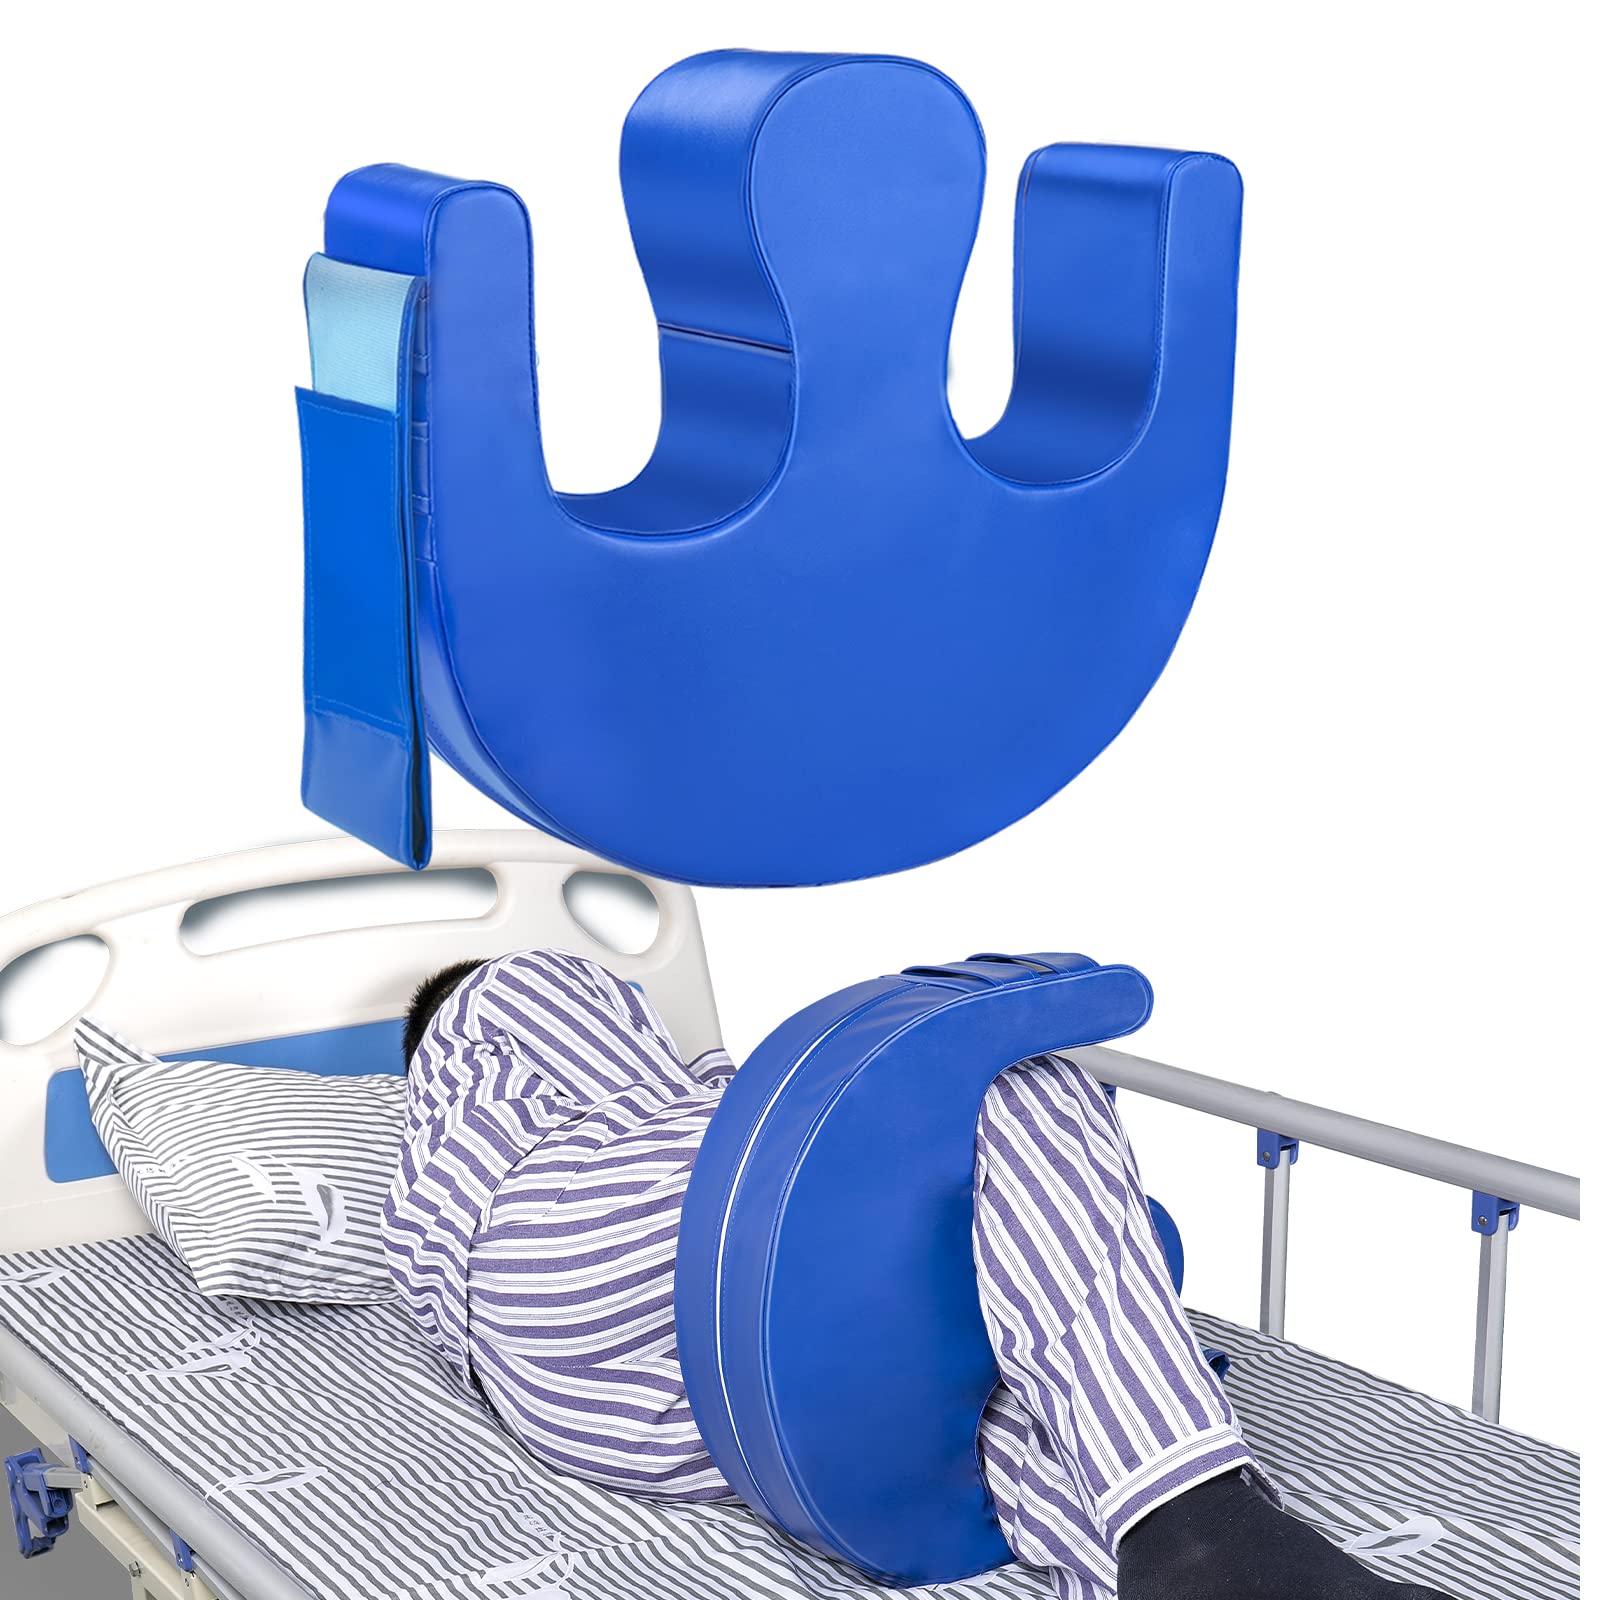 Ginchain Patient Turning Device, Bedridden Elderly Patients Turnover Device, Multifunctional Patient Turning Pillow, Waterproof PU Leather Elderly Turn Over Pillows Bedridden Patient Products (Blue)